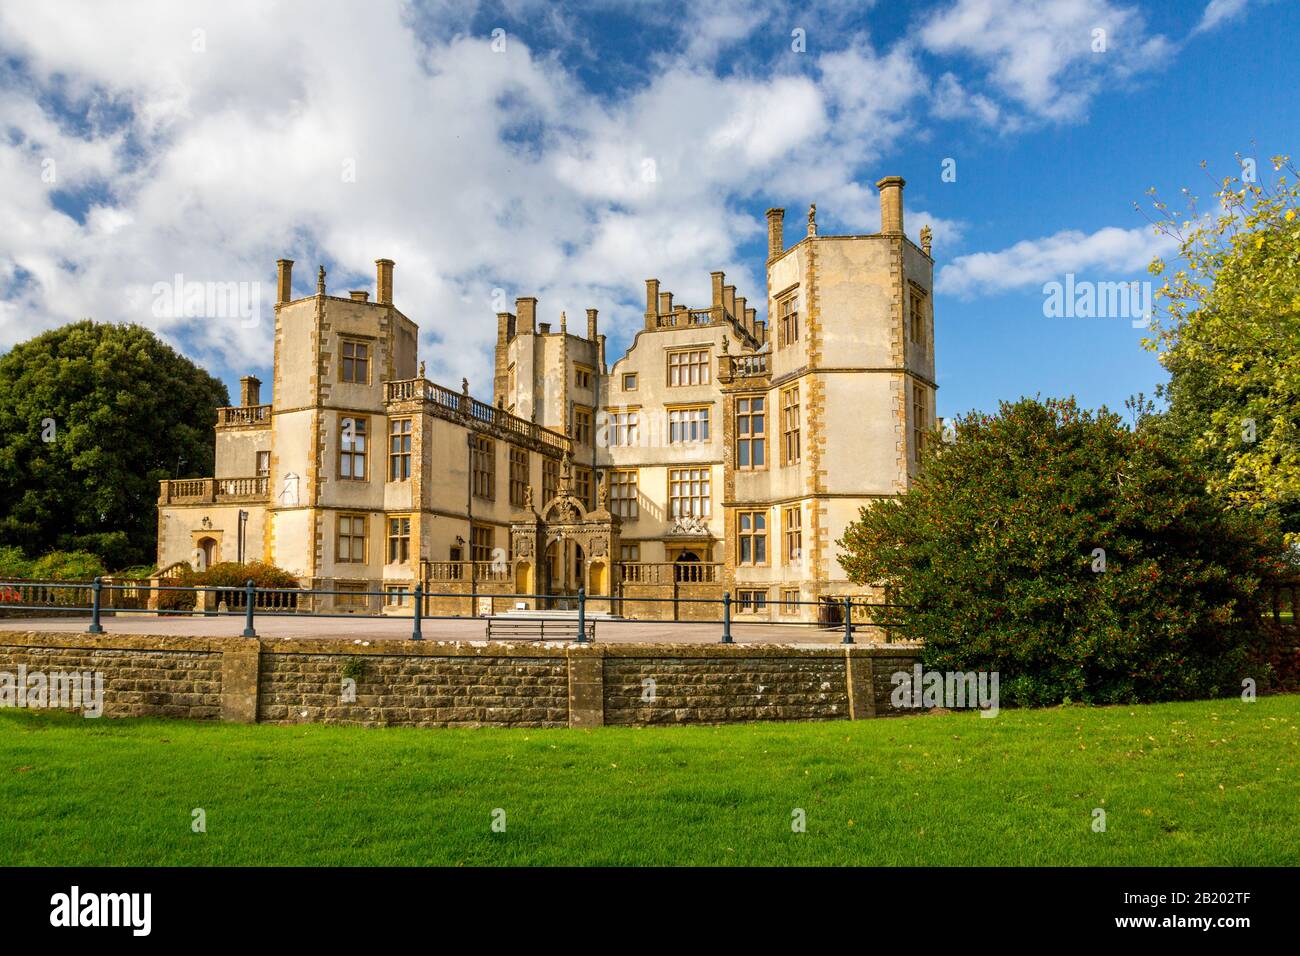 Sherborne 'New' Castle built in 1594 by Sir Walter Raleigh, Sherborne, Dorset, England, UK Stock Photo